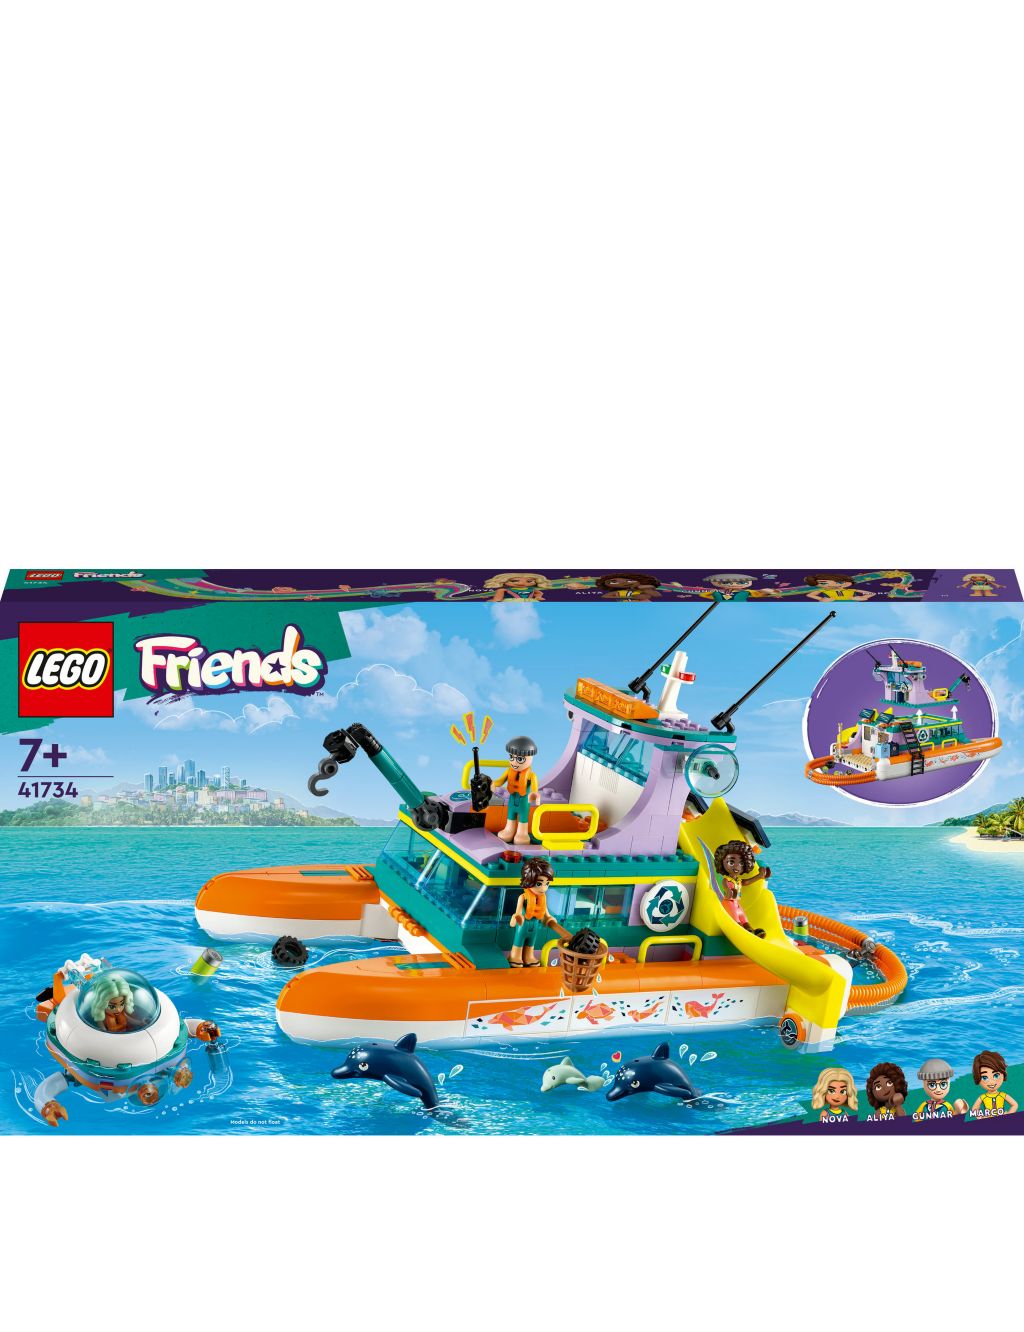 LEGO Friends Sea Rescue Boat Toy Playset (7+ Yrs) image 3